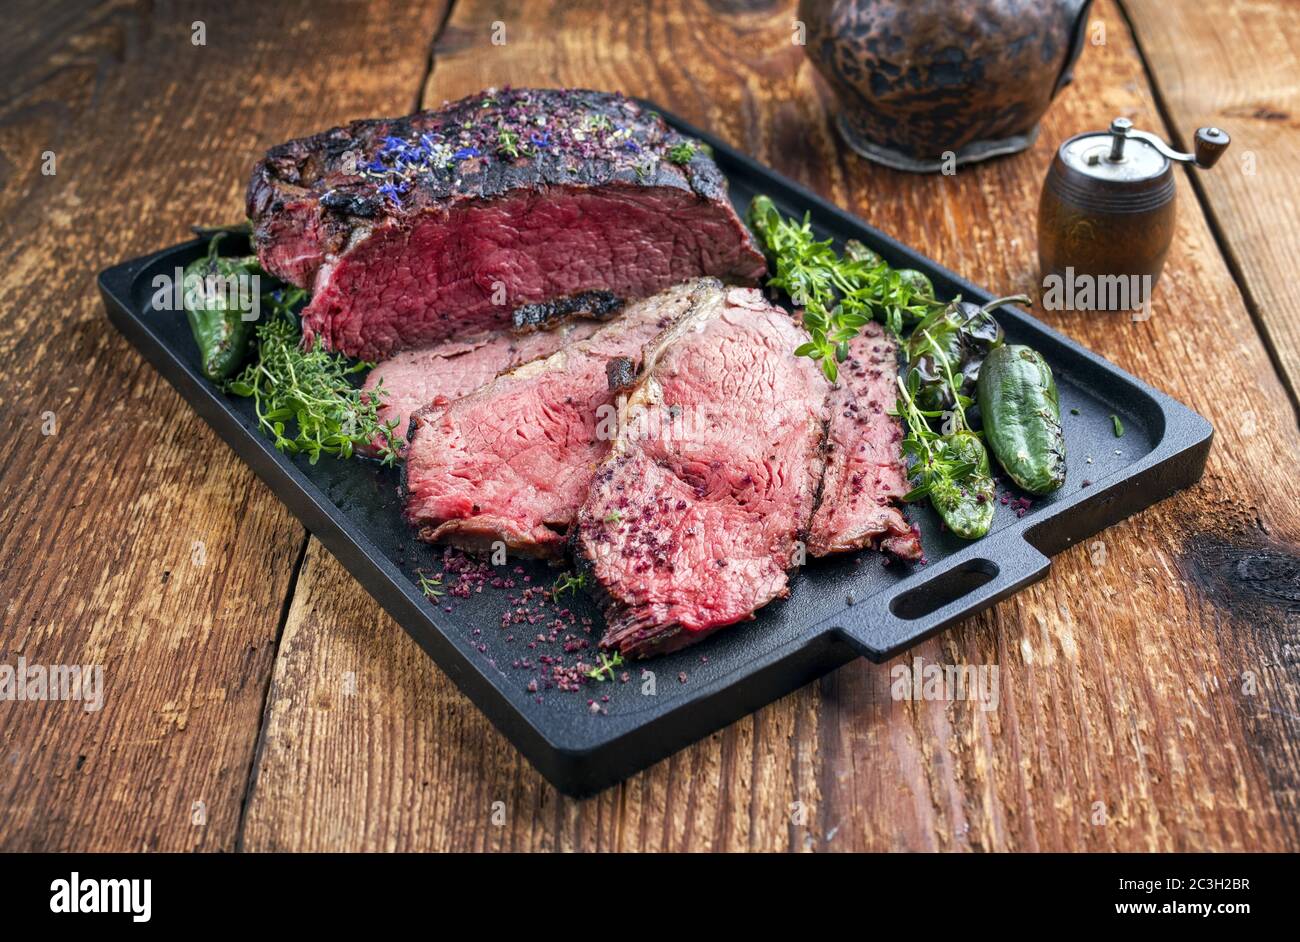 Traditional Commonwealth Sunday roast with sliced cold cuts roast beef with herbs and chili as closeup on a modern design tray Stock Photo